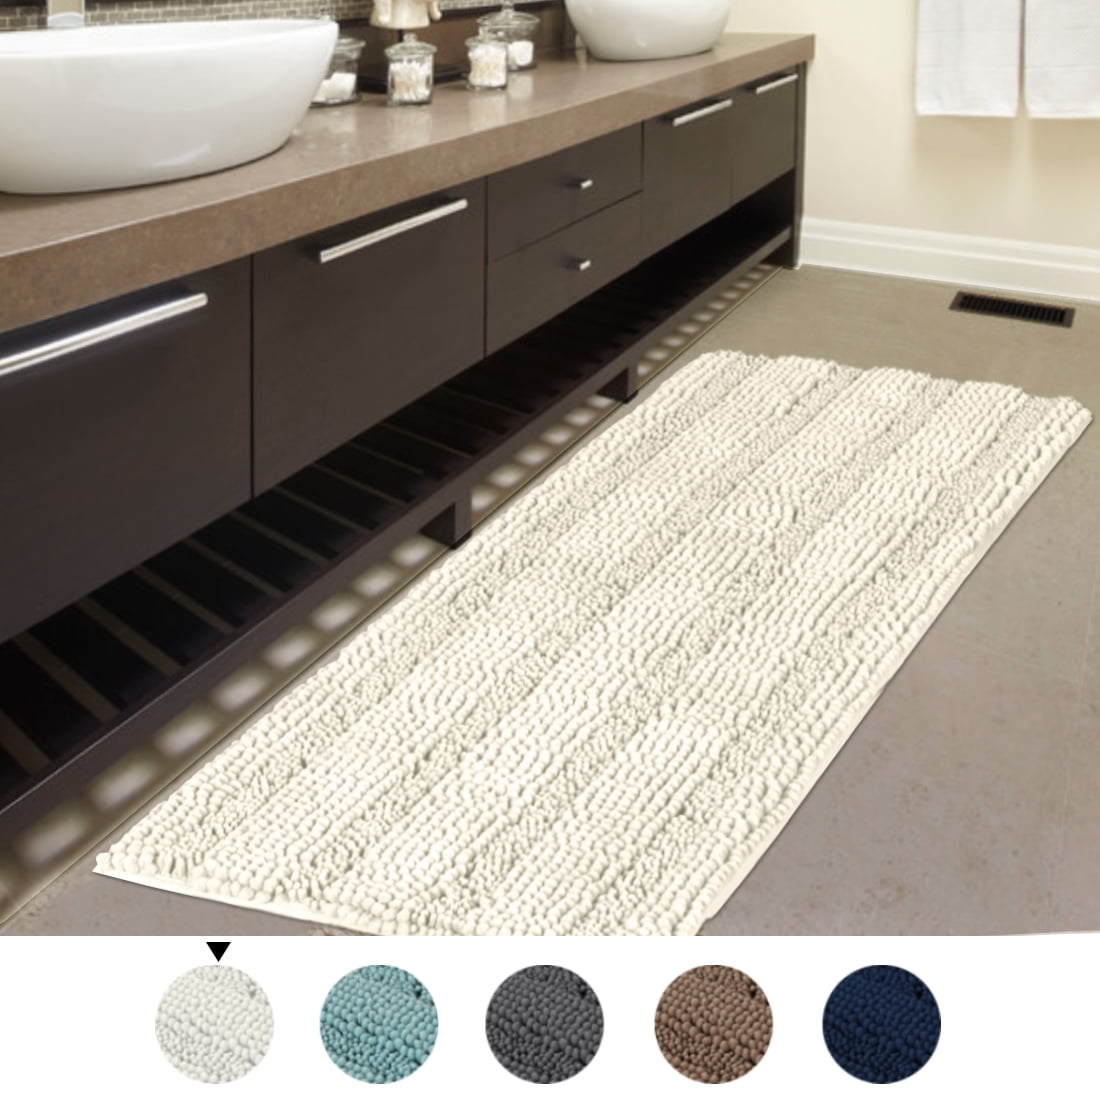 Wimaha Non-Slip Bath Mats Rugs, Extra Large, Super Soft, Water